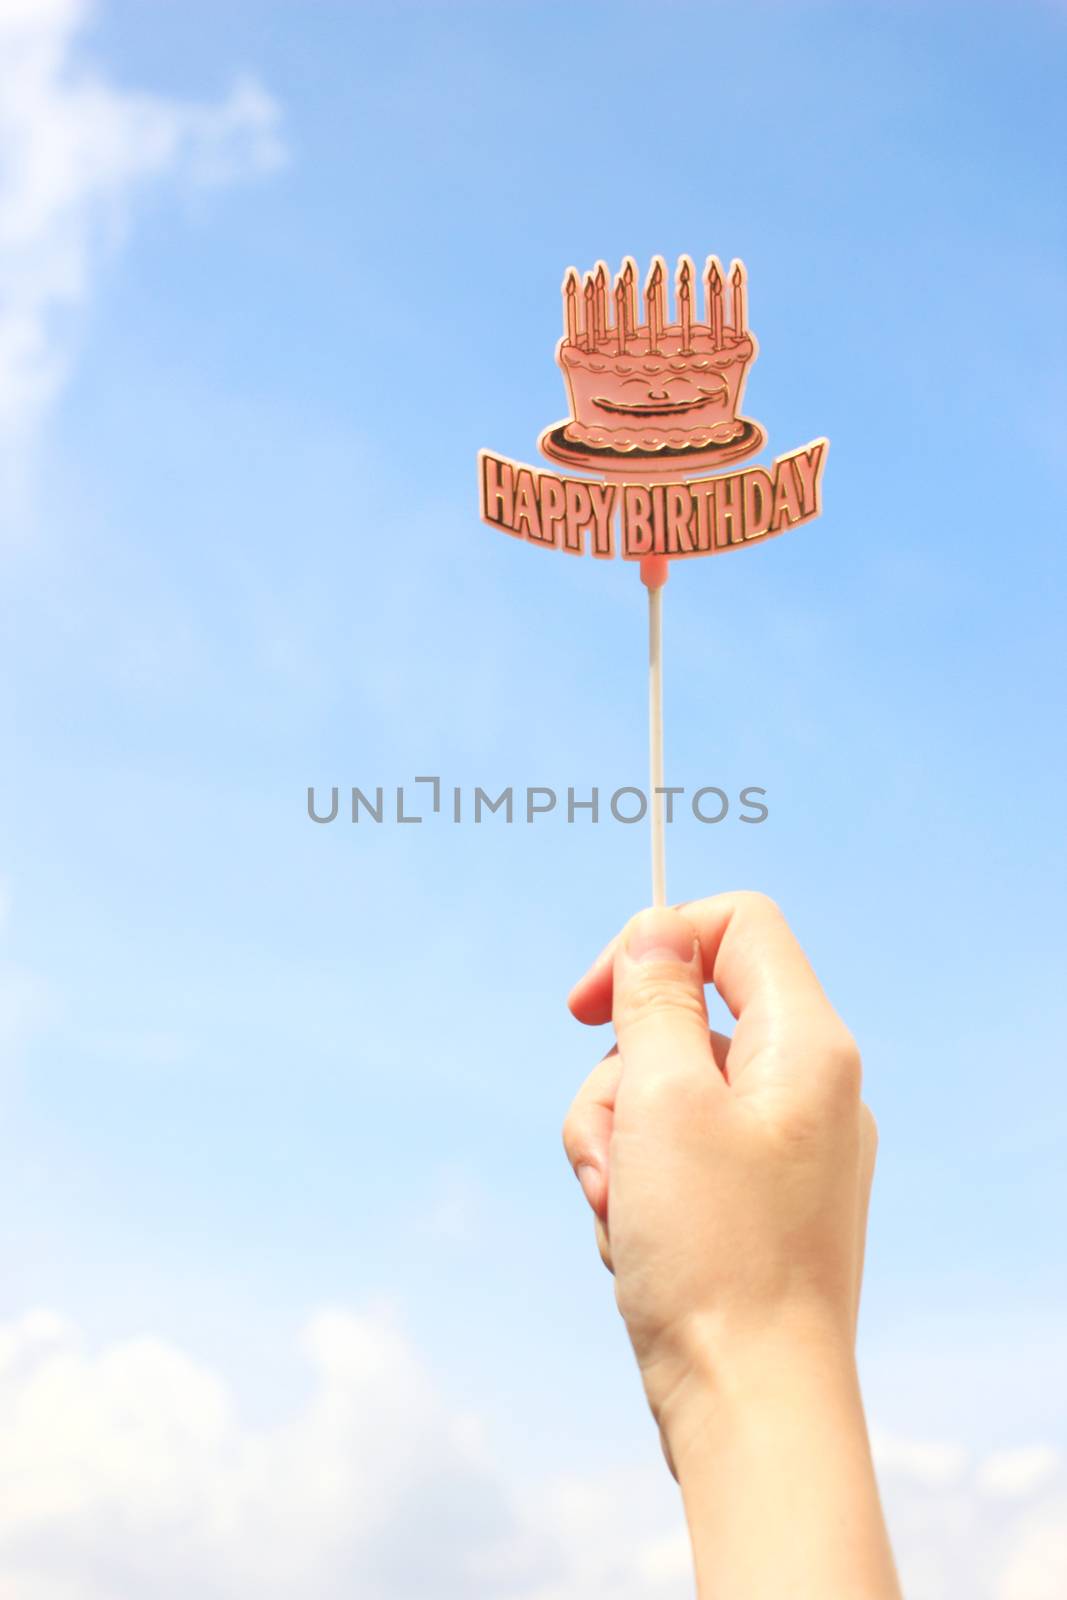 Hand holding happy birthday tag with blue sky